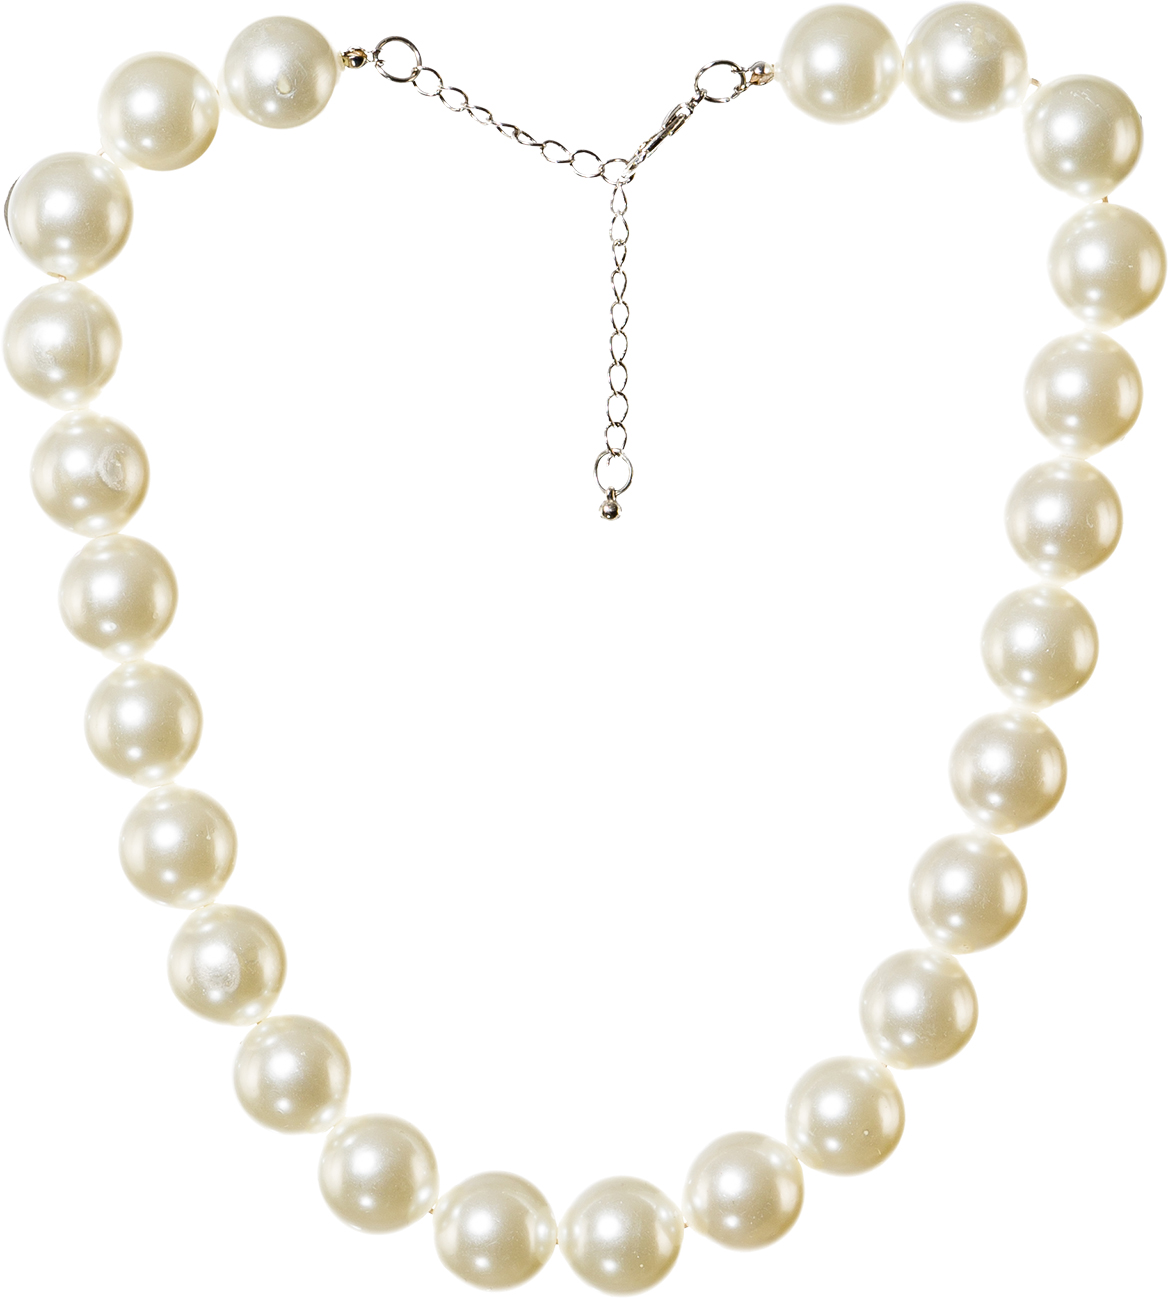 Pearl necklace short, large pearls